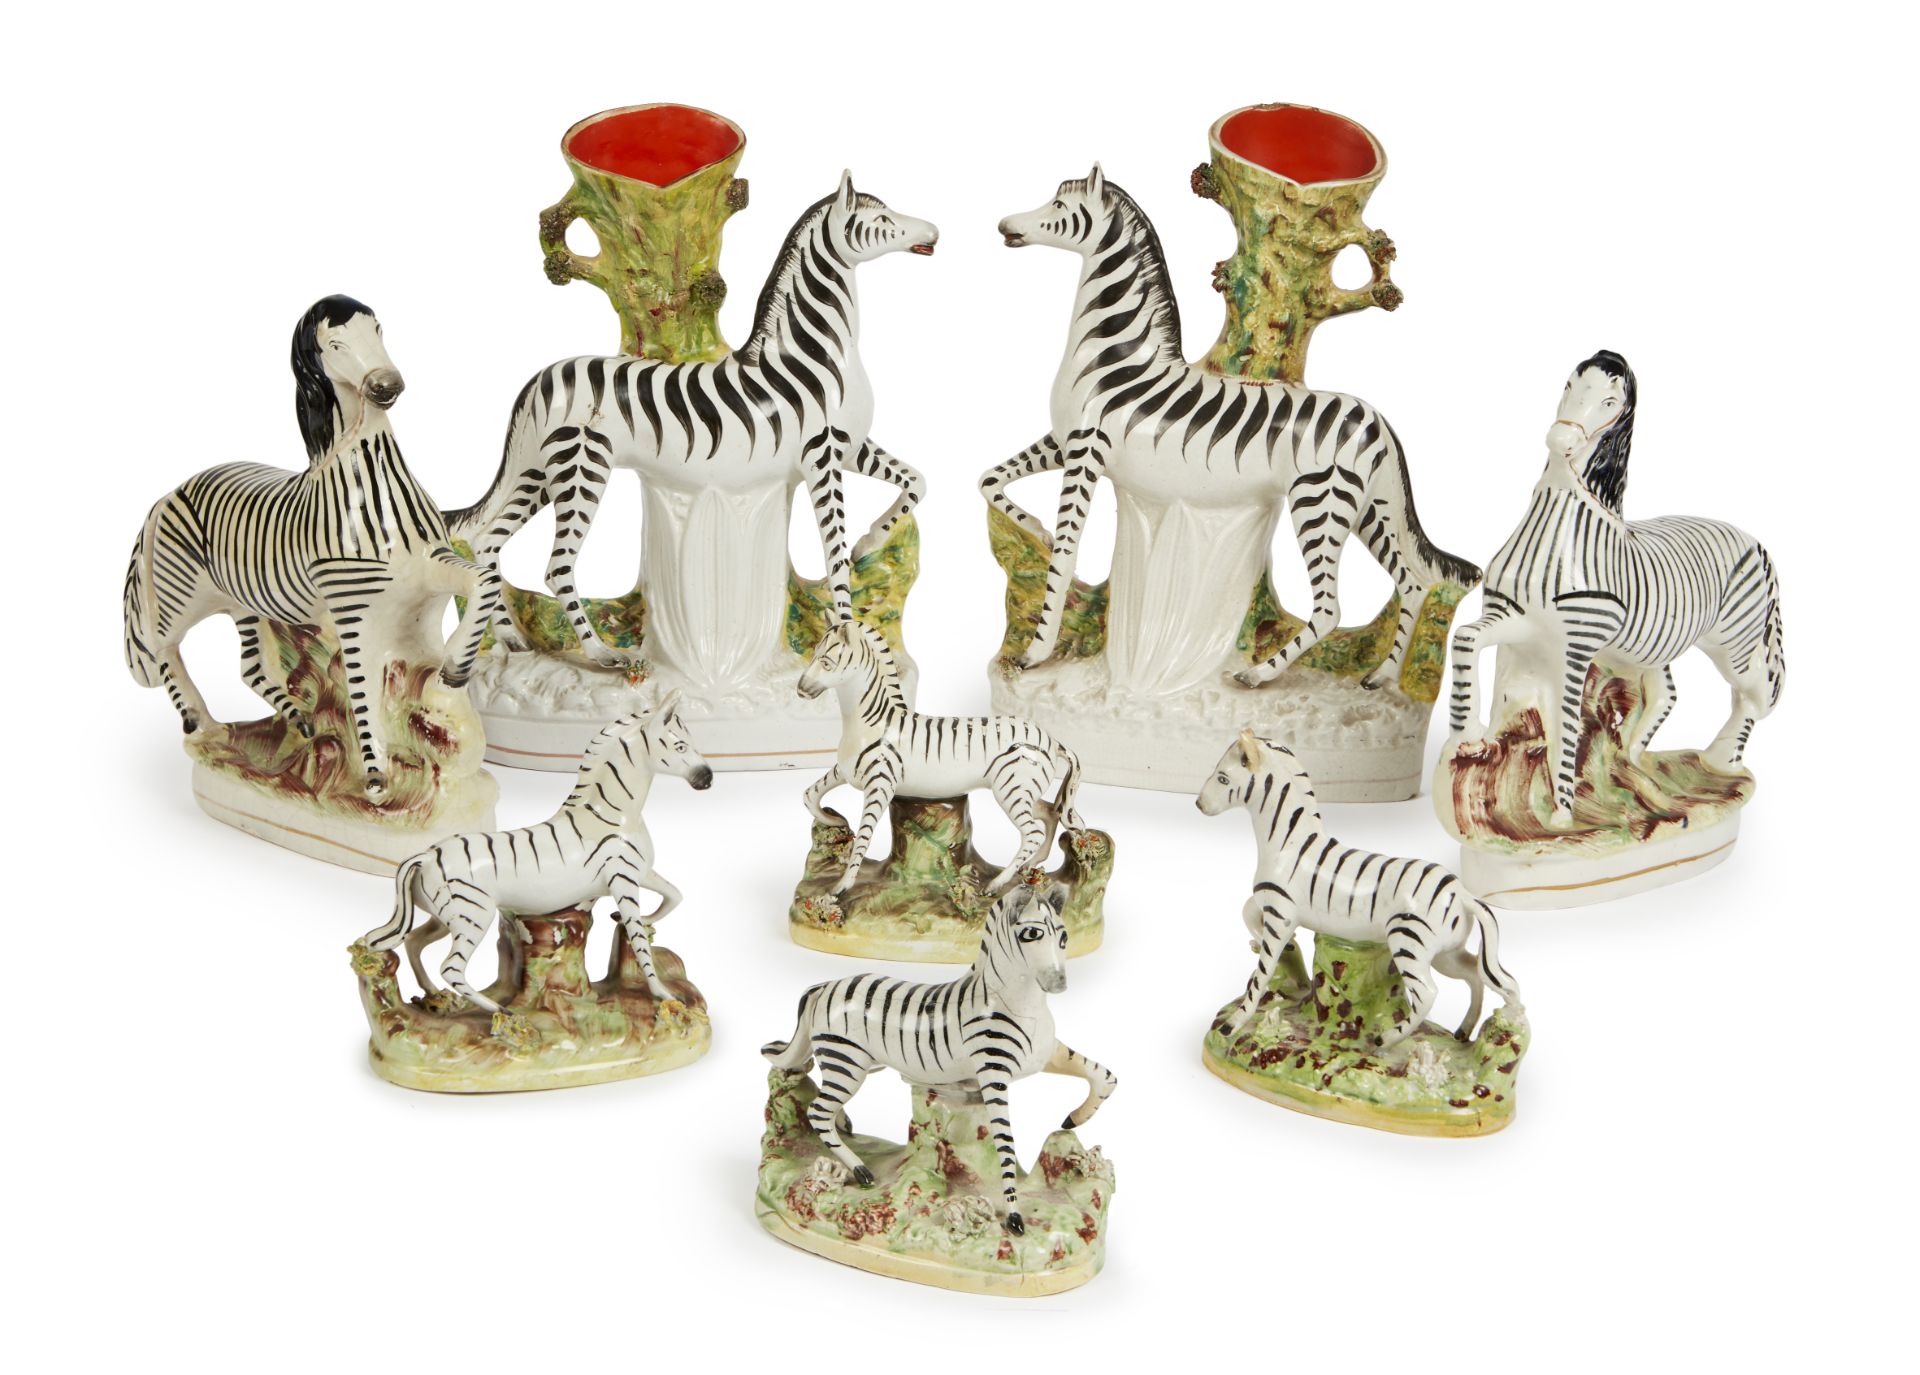 A collection of Staffordshire flatback zebras